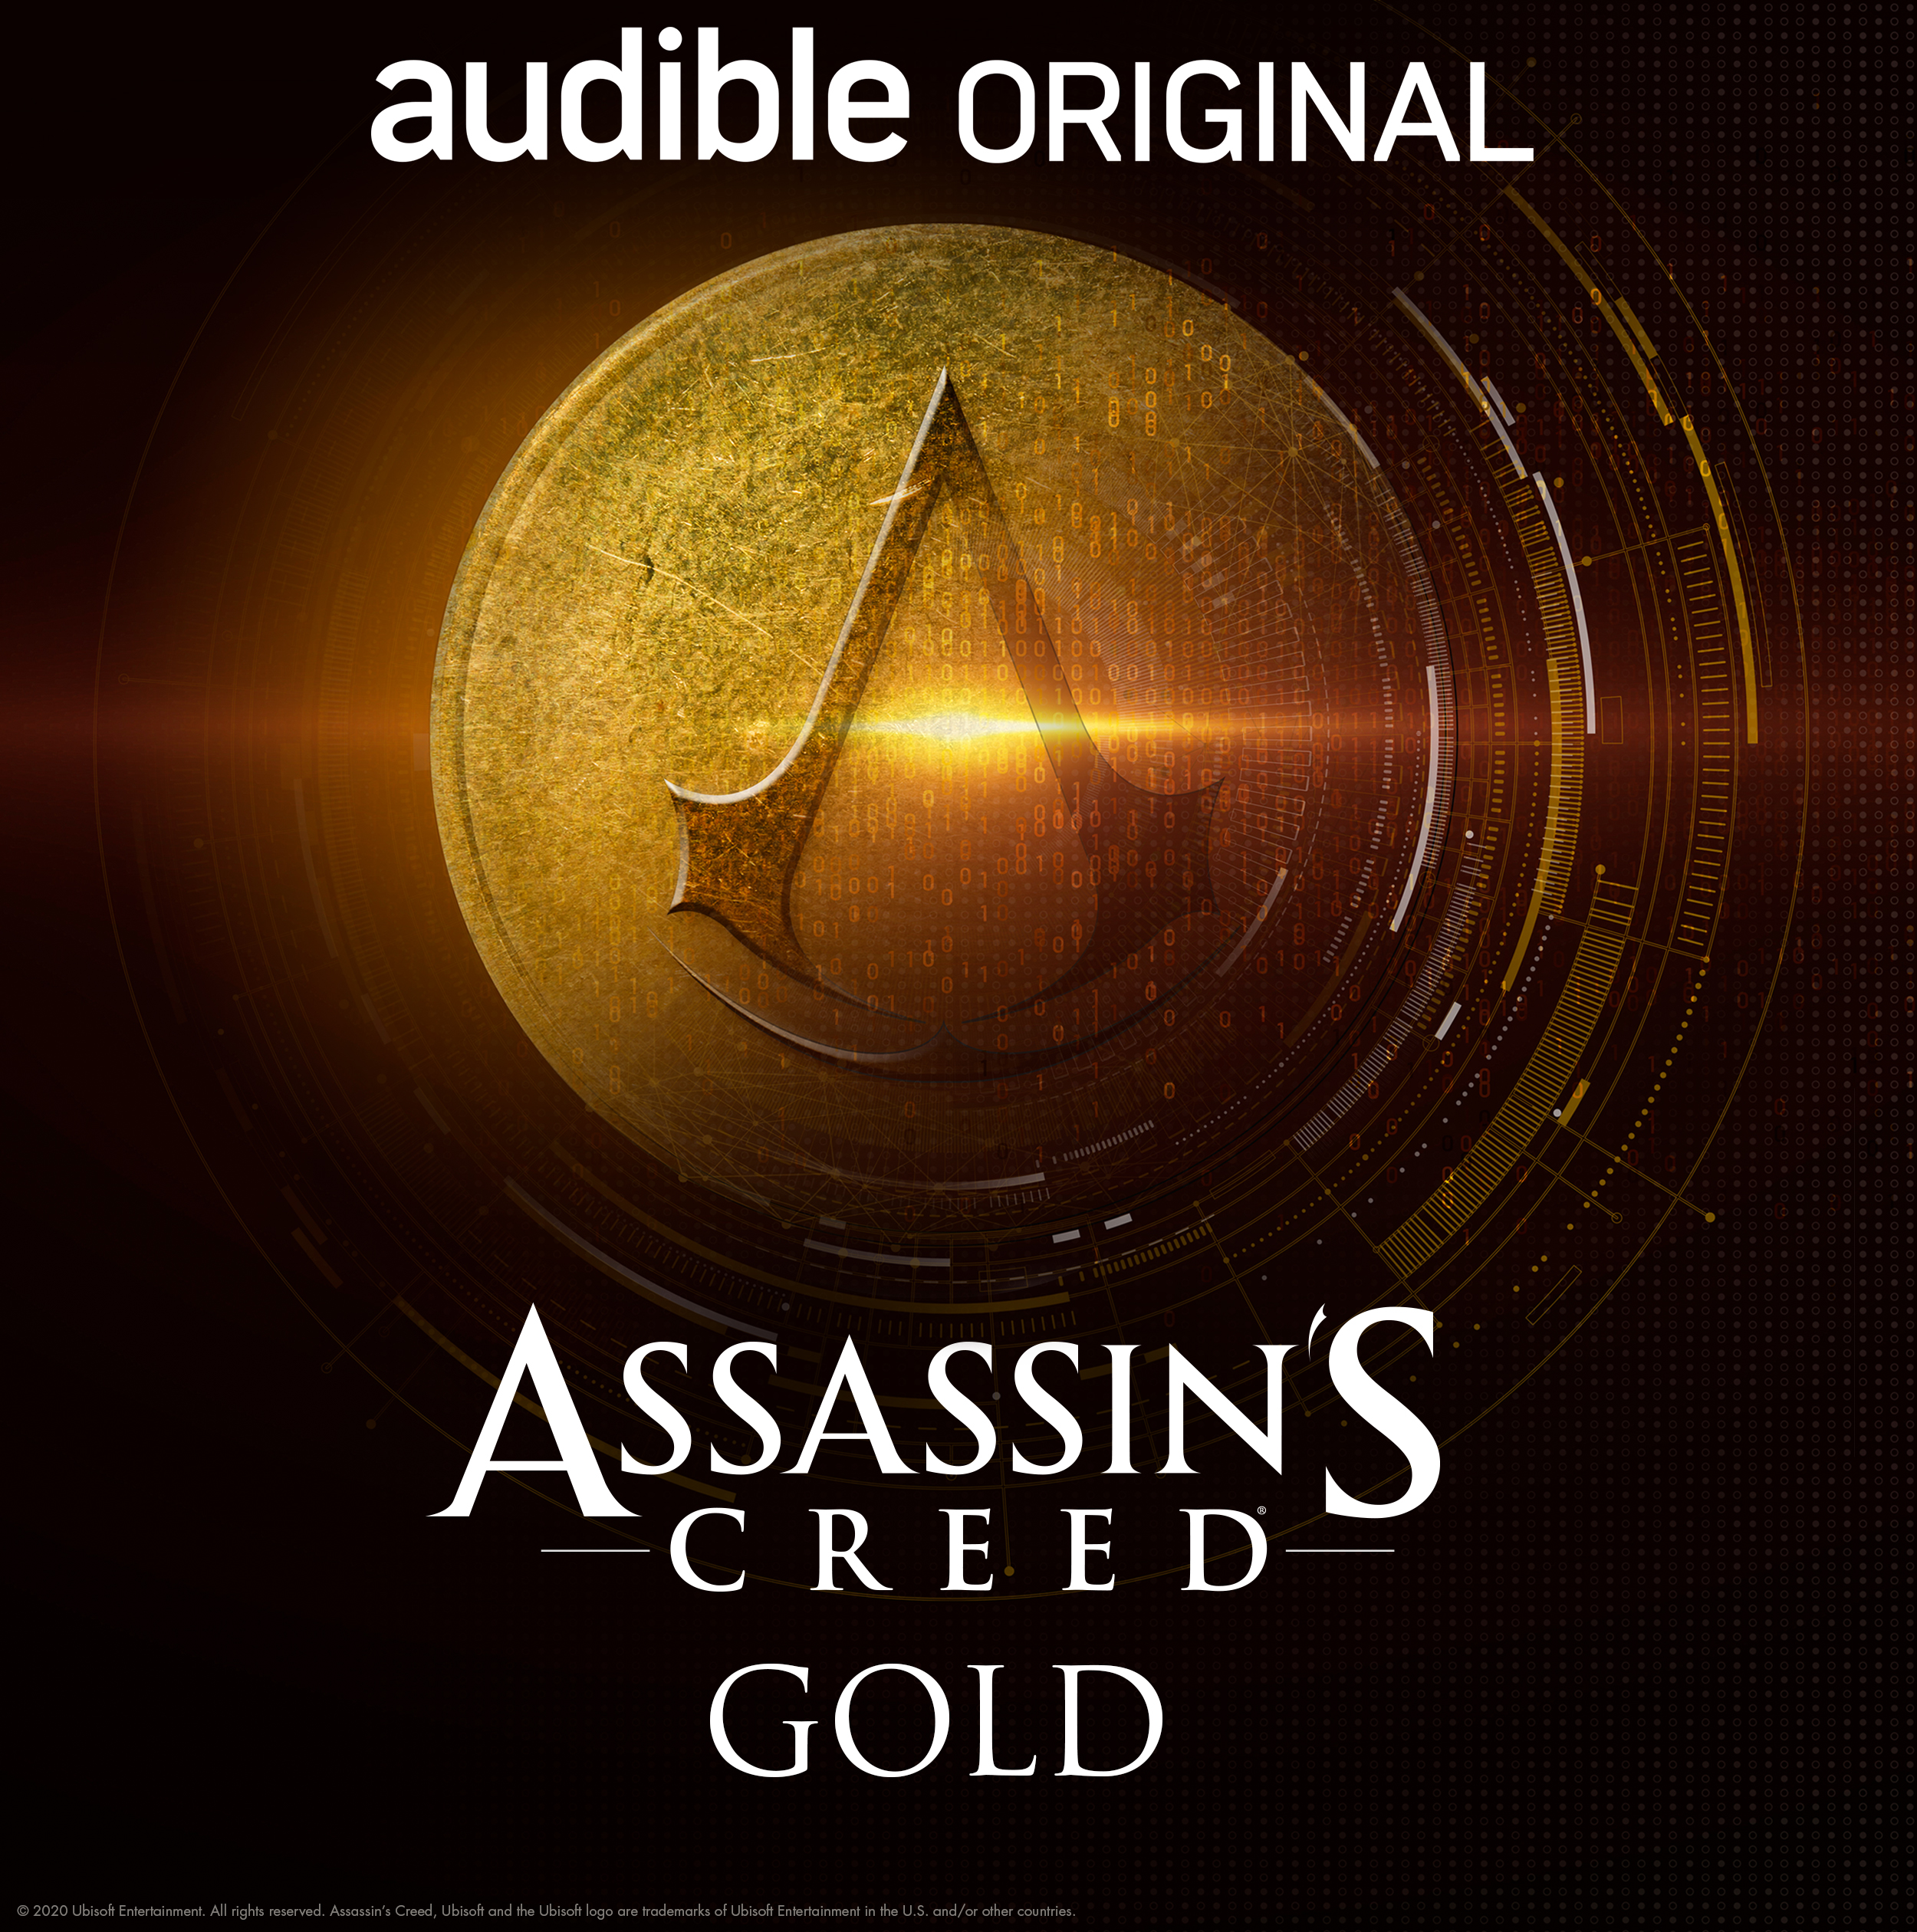 Assassin's Creed Gold